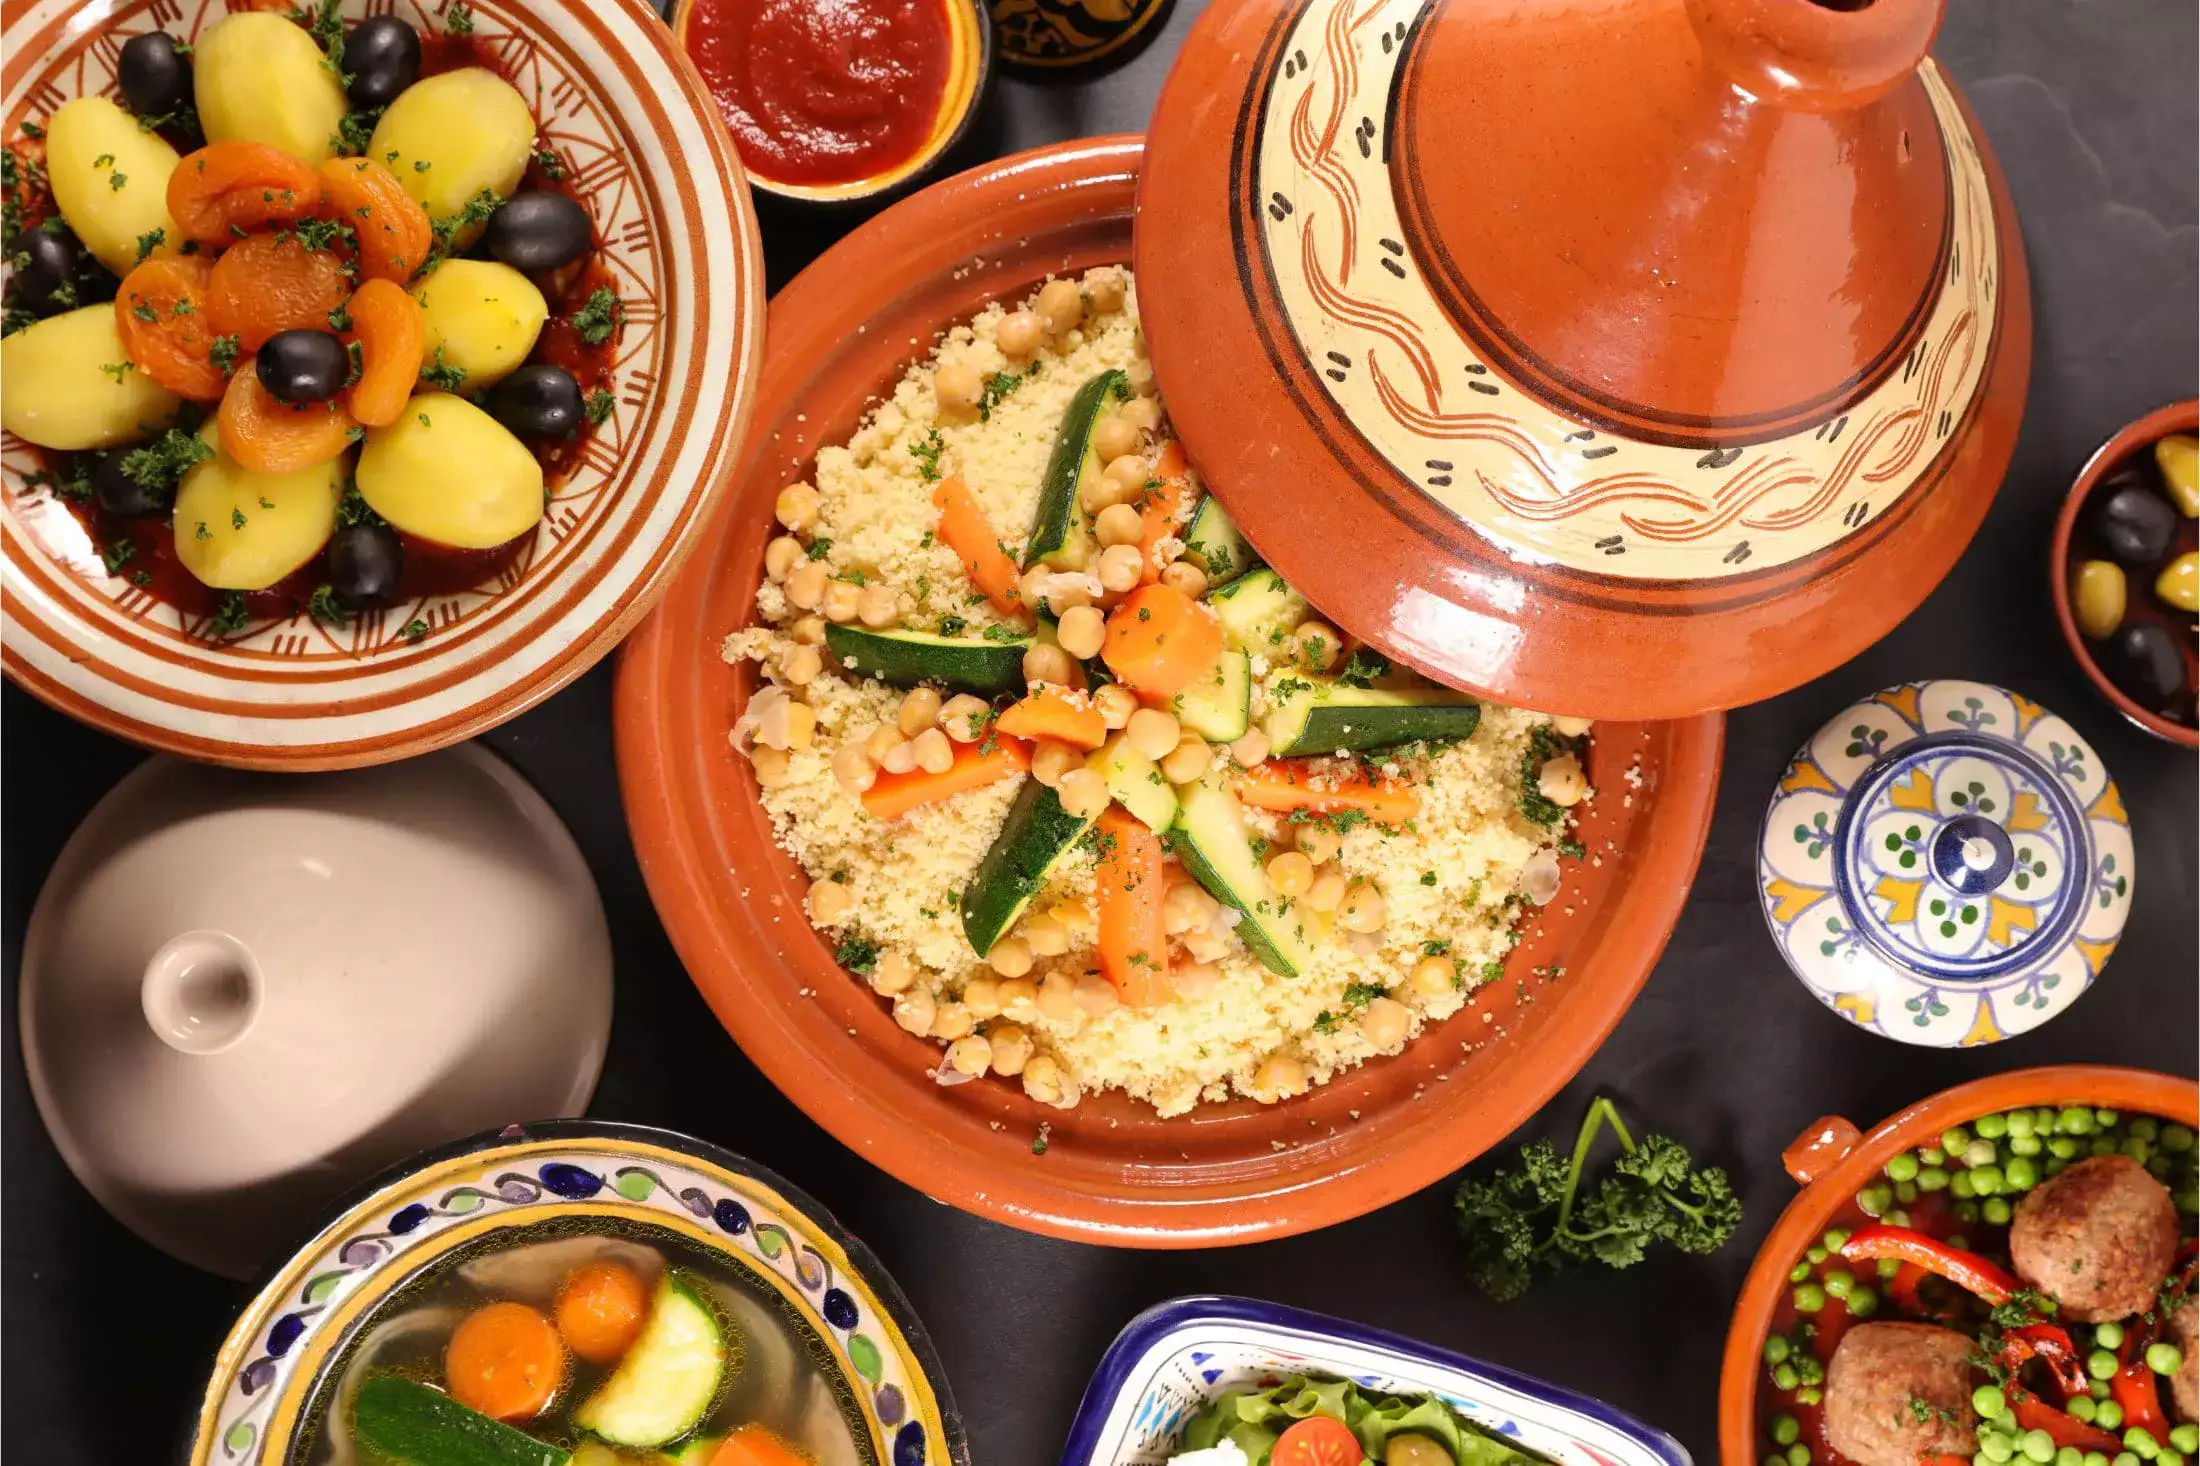 Classic Moroccan dishes - Couscous, tagine and more